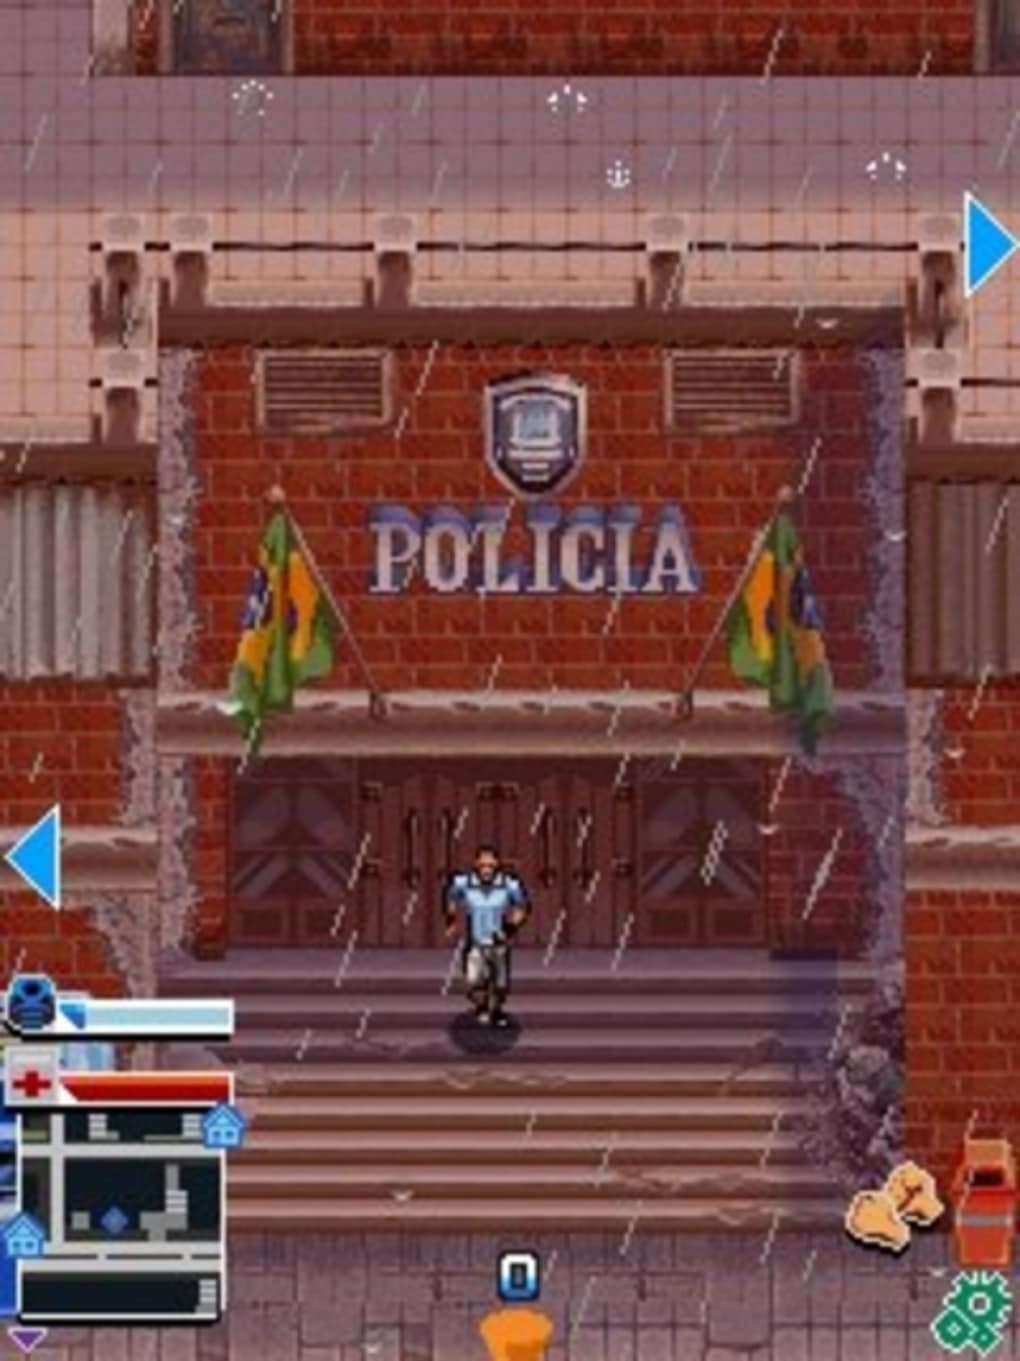 free download gangstar rio full version for android